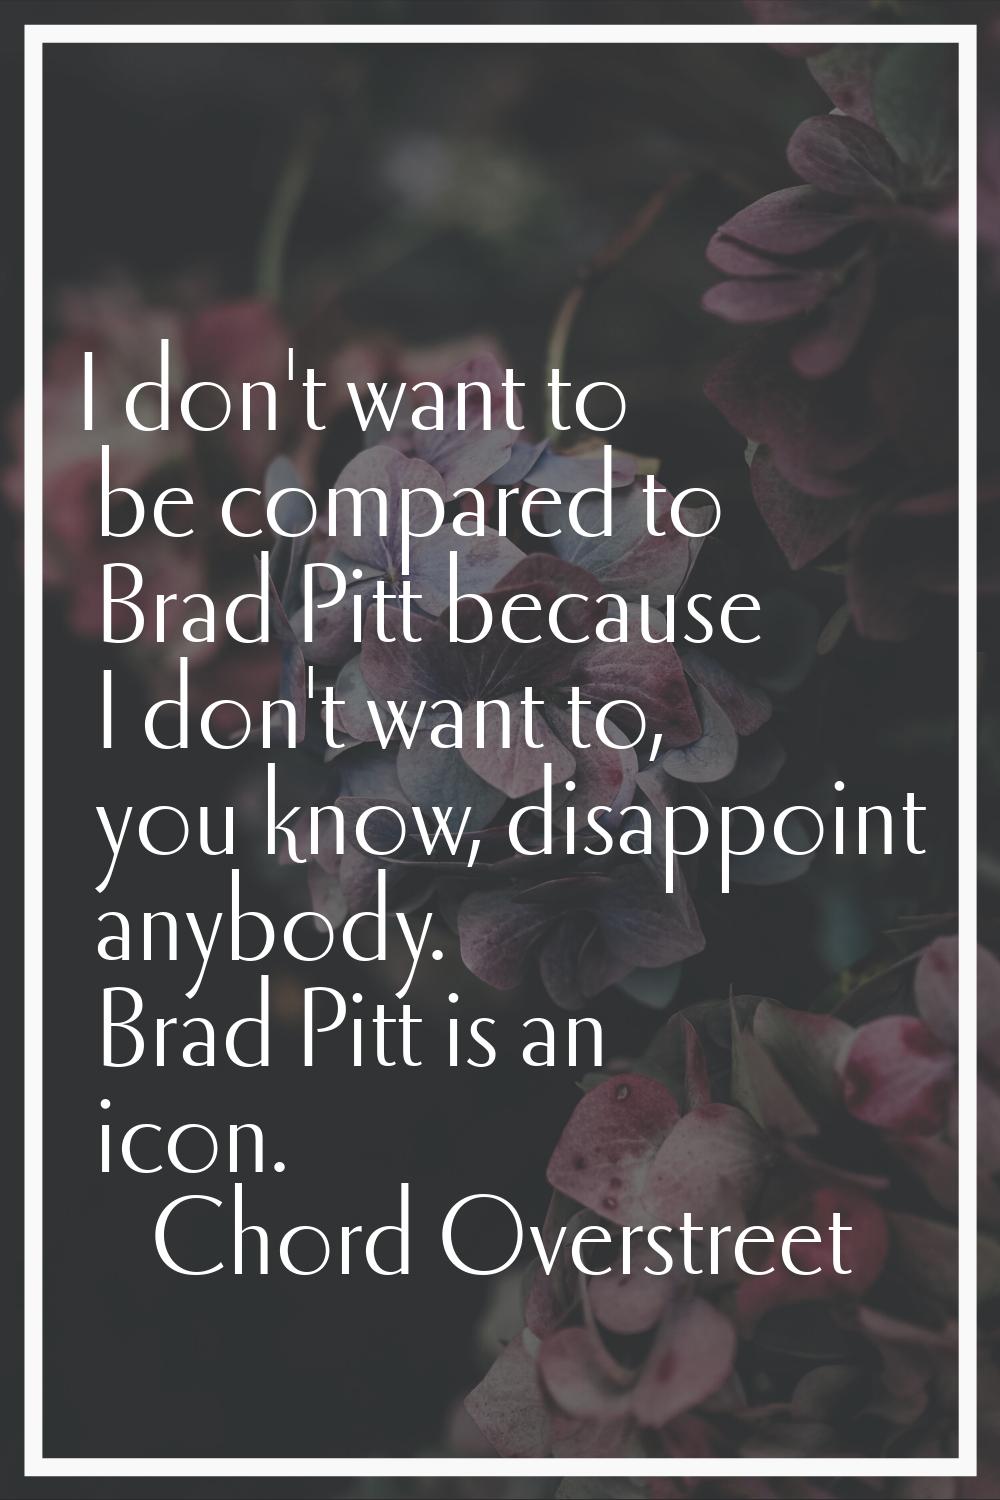 I don't want to be compared to Brad Pitt because I don't want to, you know, disappoint anybody. Bra